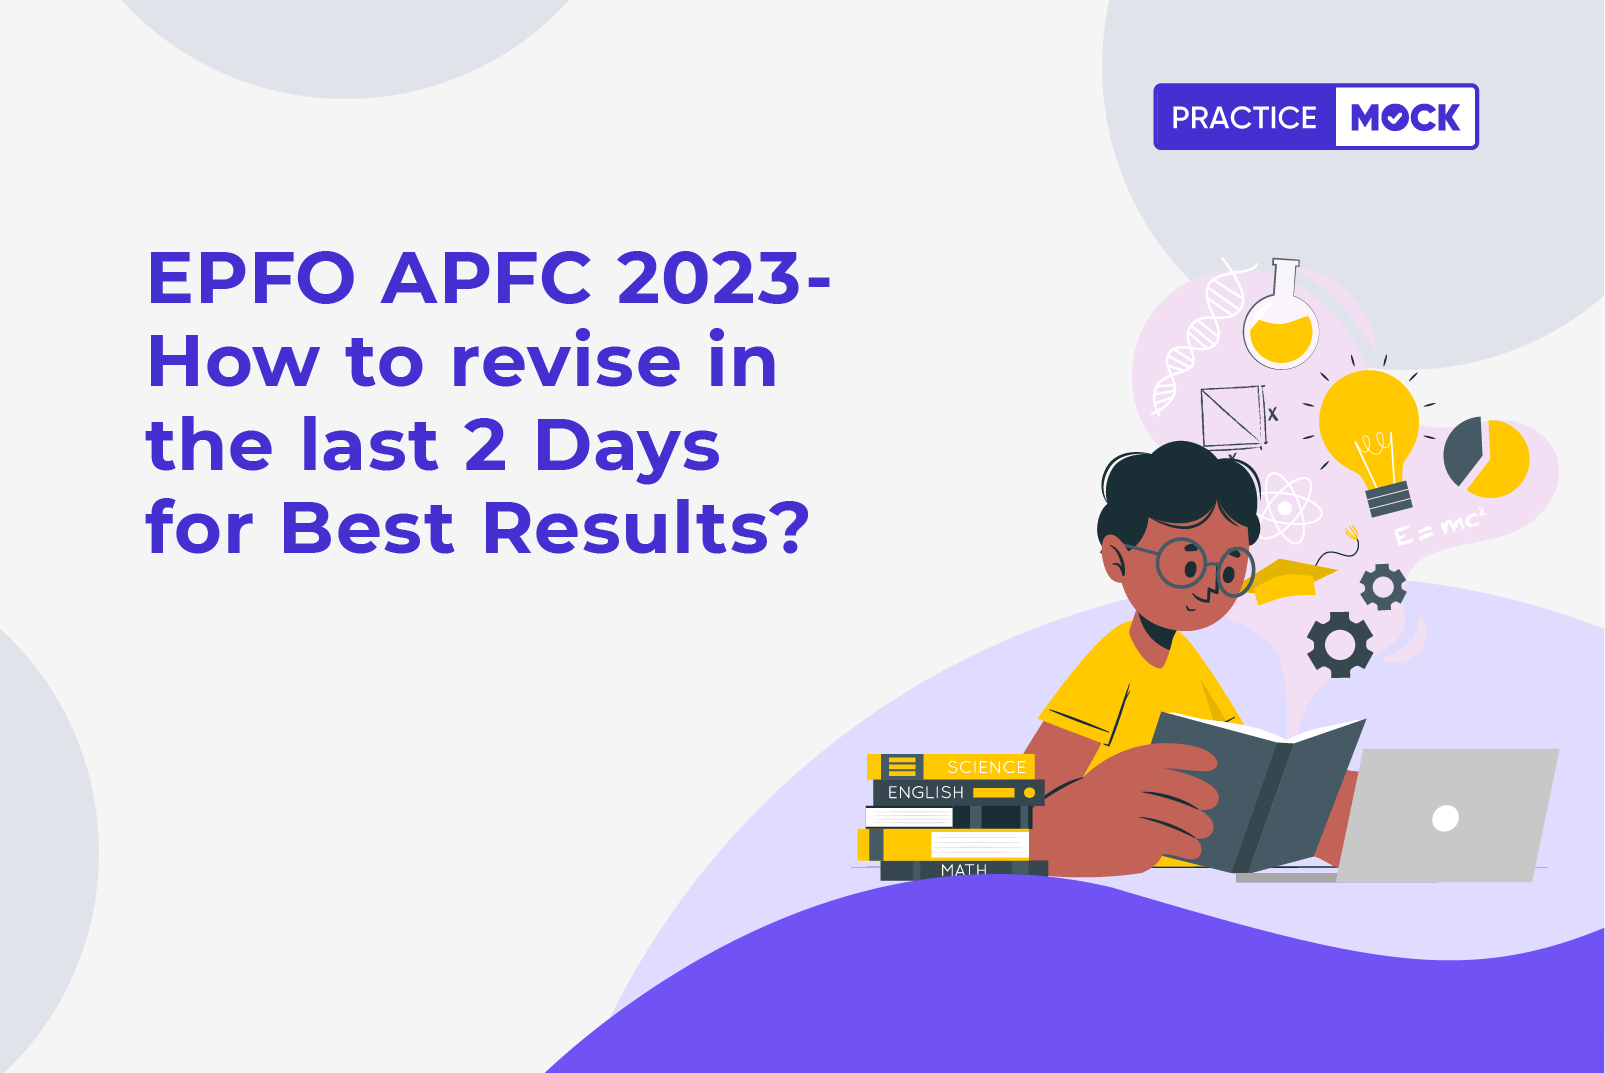 EPFO APFC 2023-How to revise in the last 2 Days for Best Results?